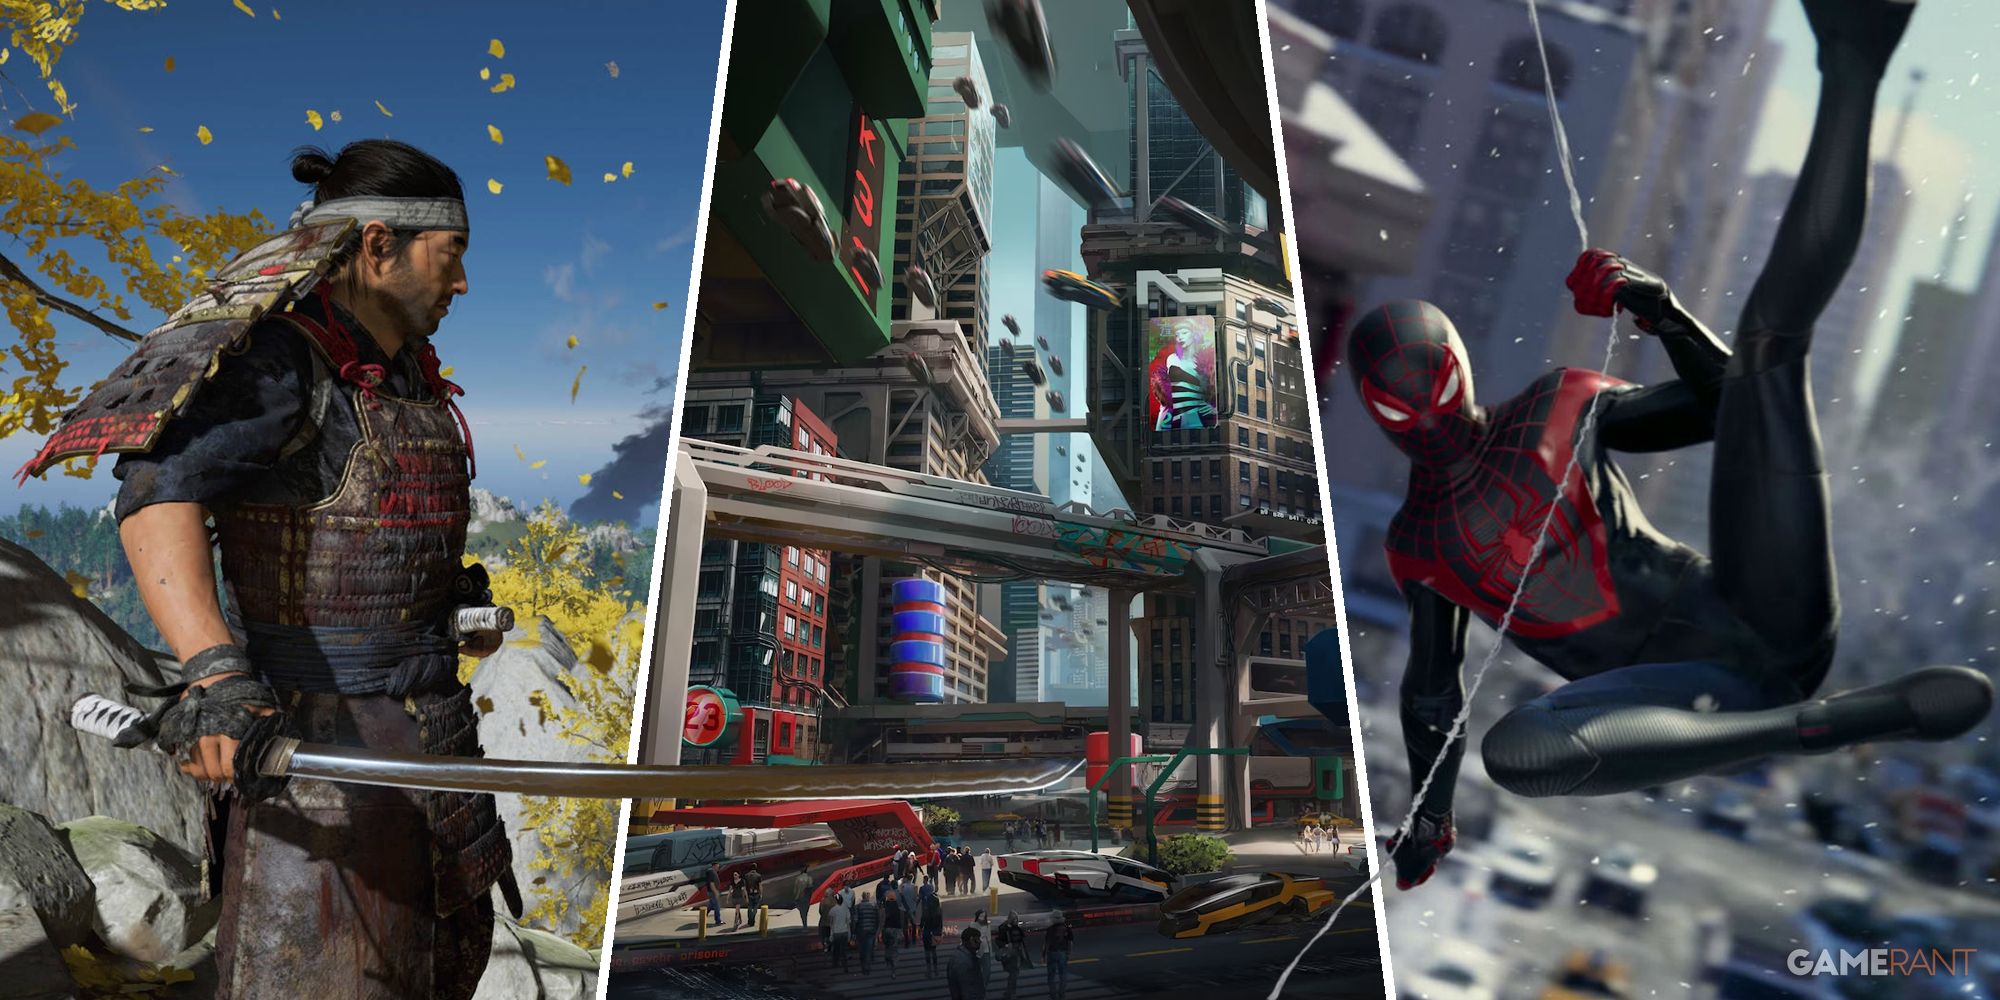 Ghost of Tsushima, Cyberpunk 2077, and Marvel's Spider-Man: Miles Morales